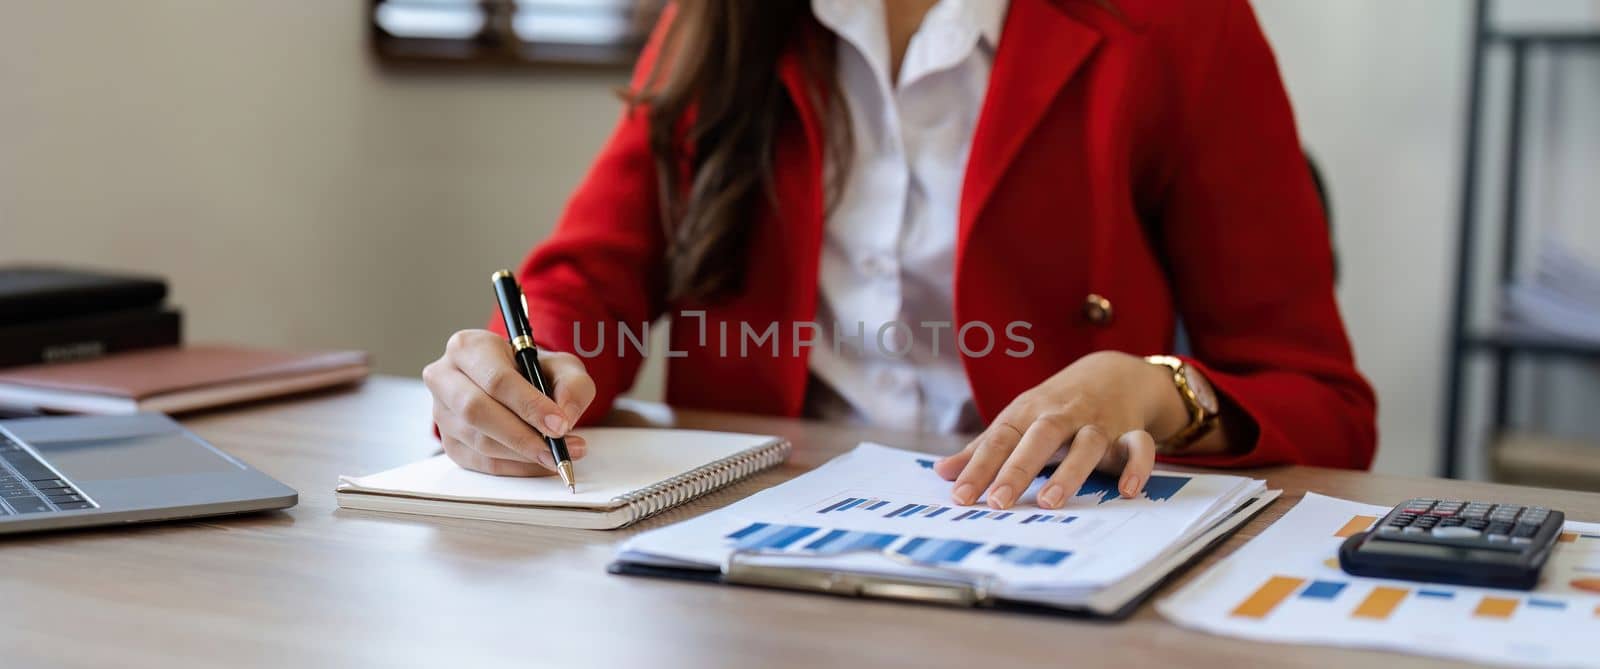 close-up shot of accountant using calculator while taking notes on office desk.